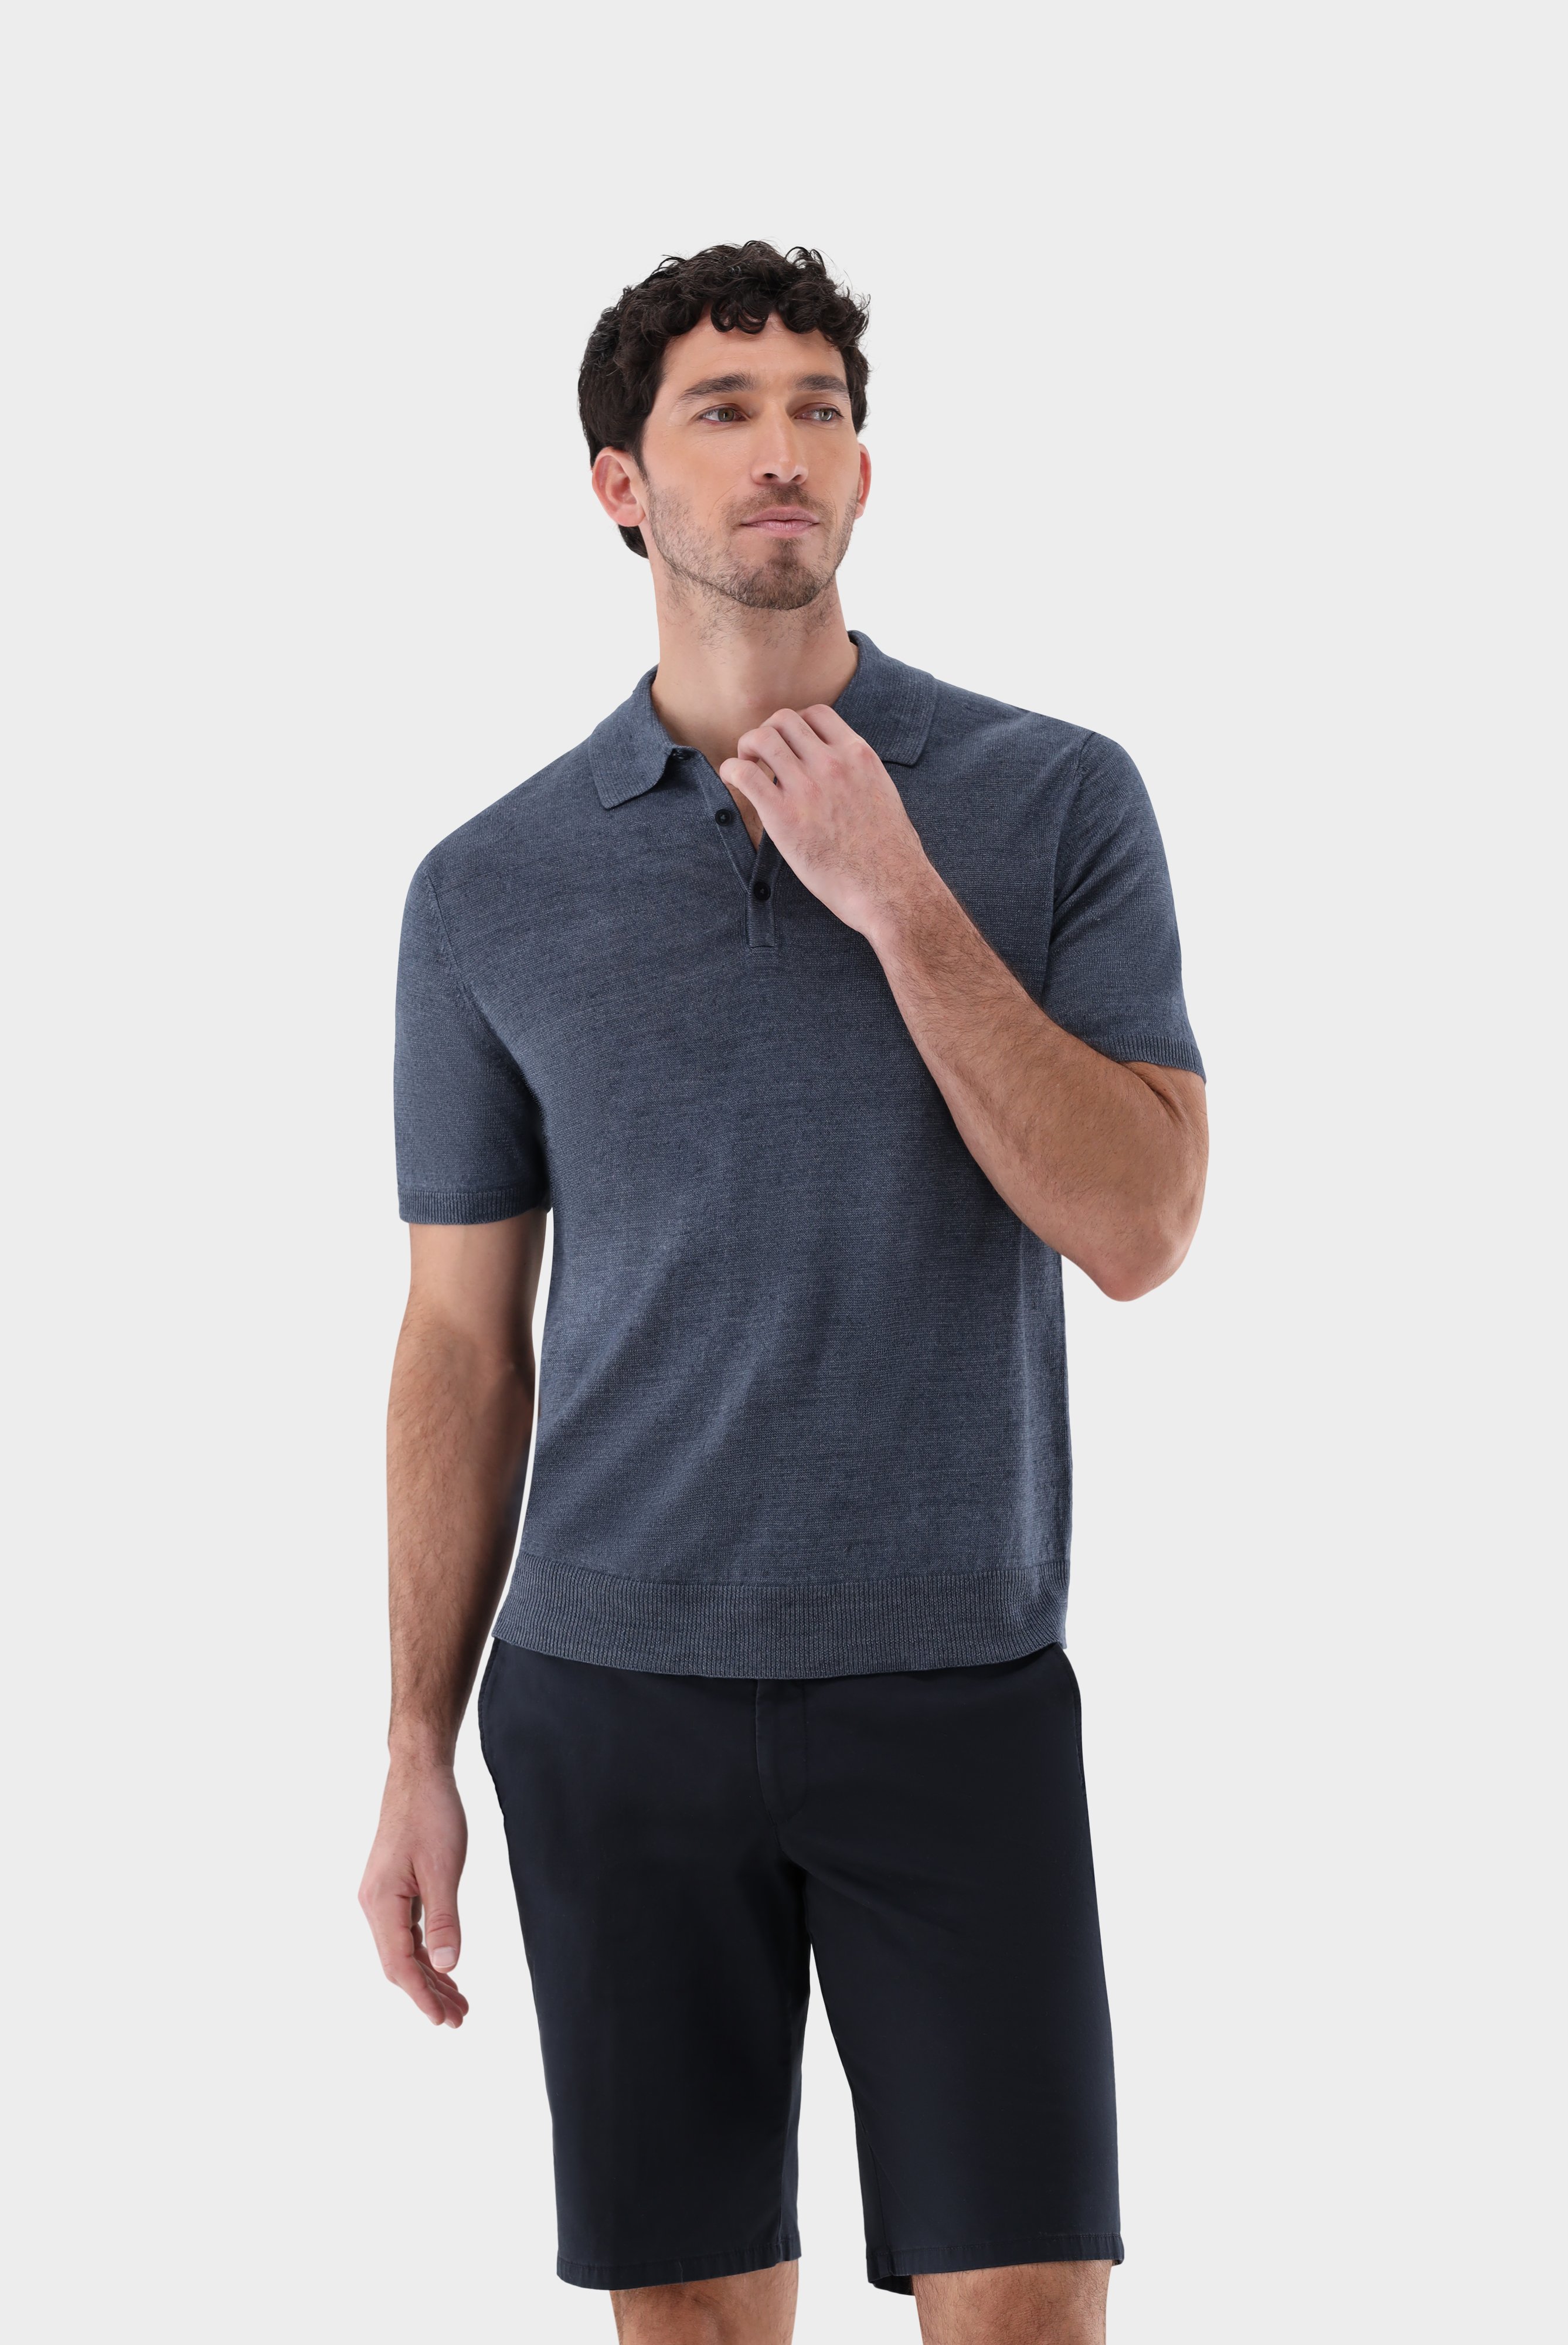 Poloshirts+Knit Polo in Linen+82.8603..S00169.760.S